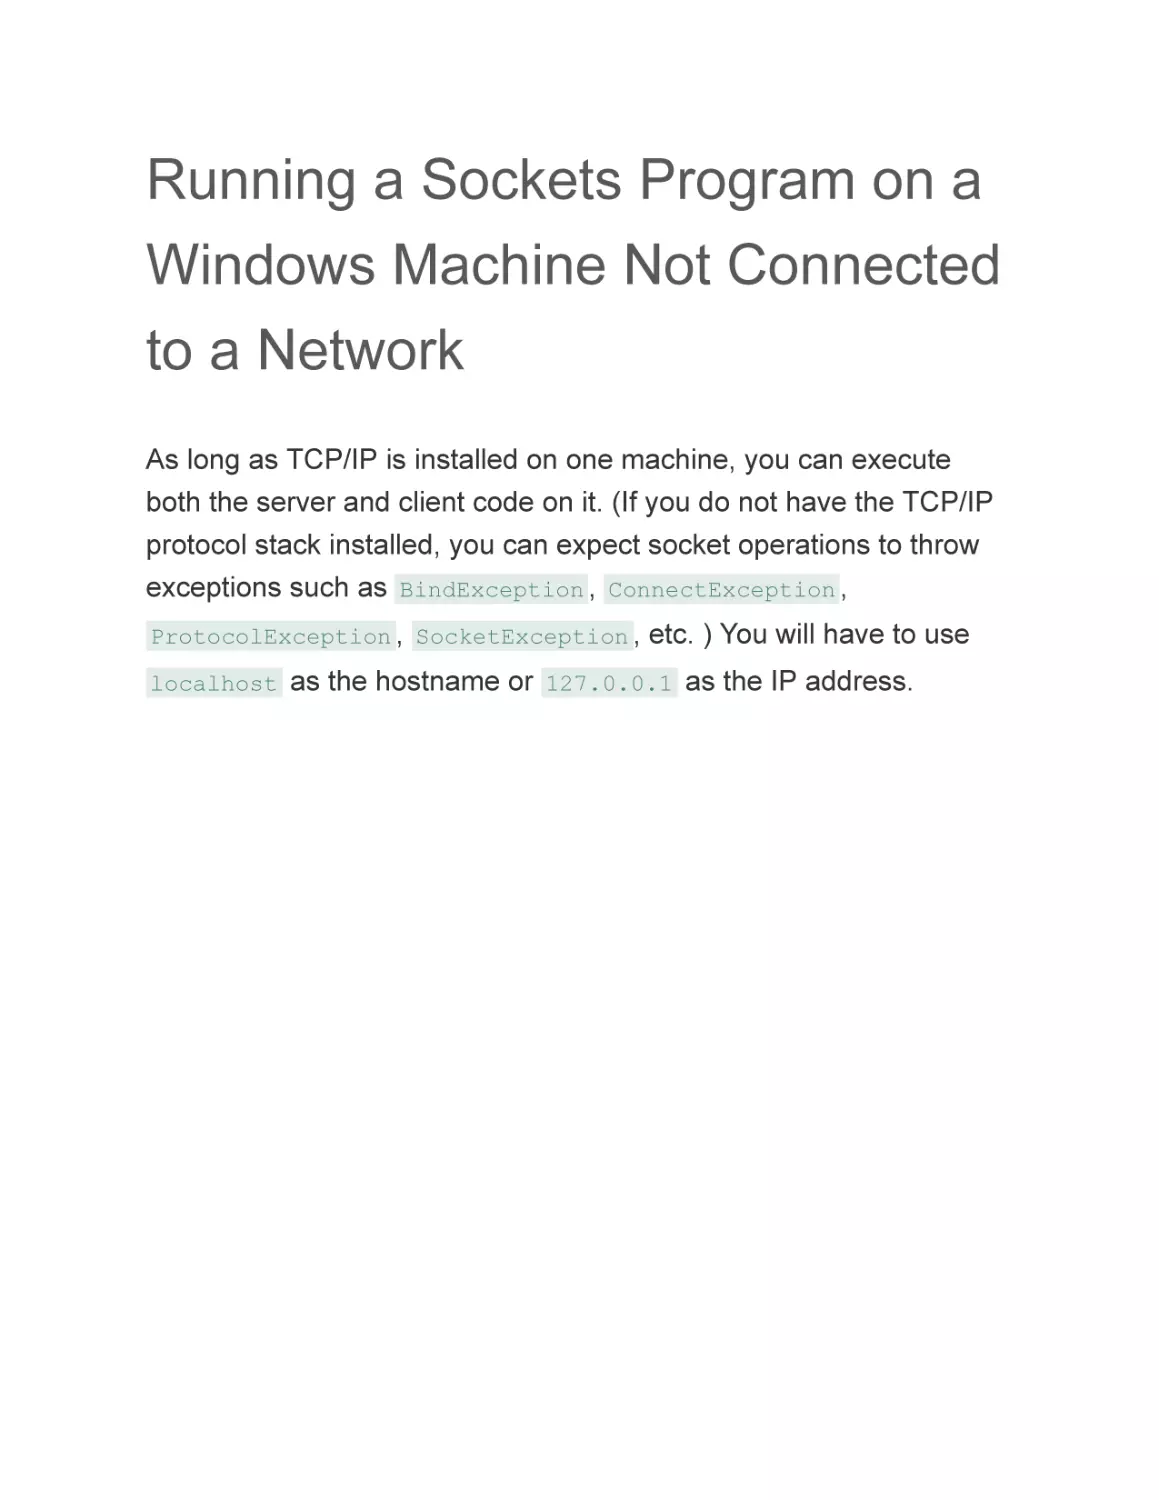 Running a Sockets Program on a Windows Machine Not Connected to a Network